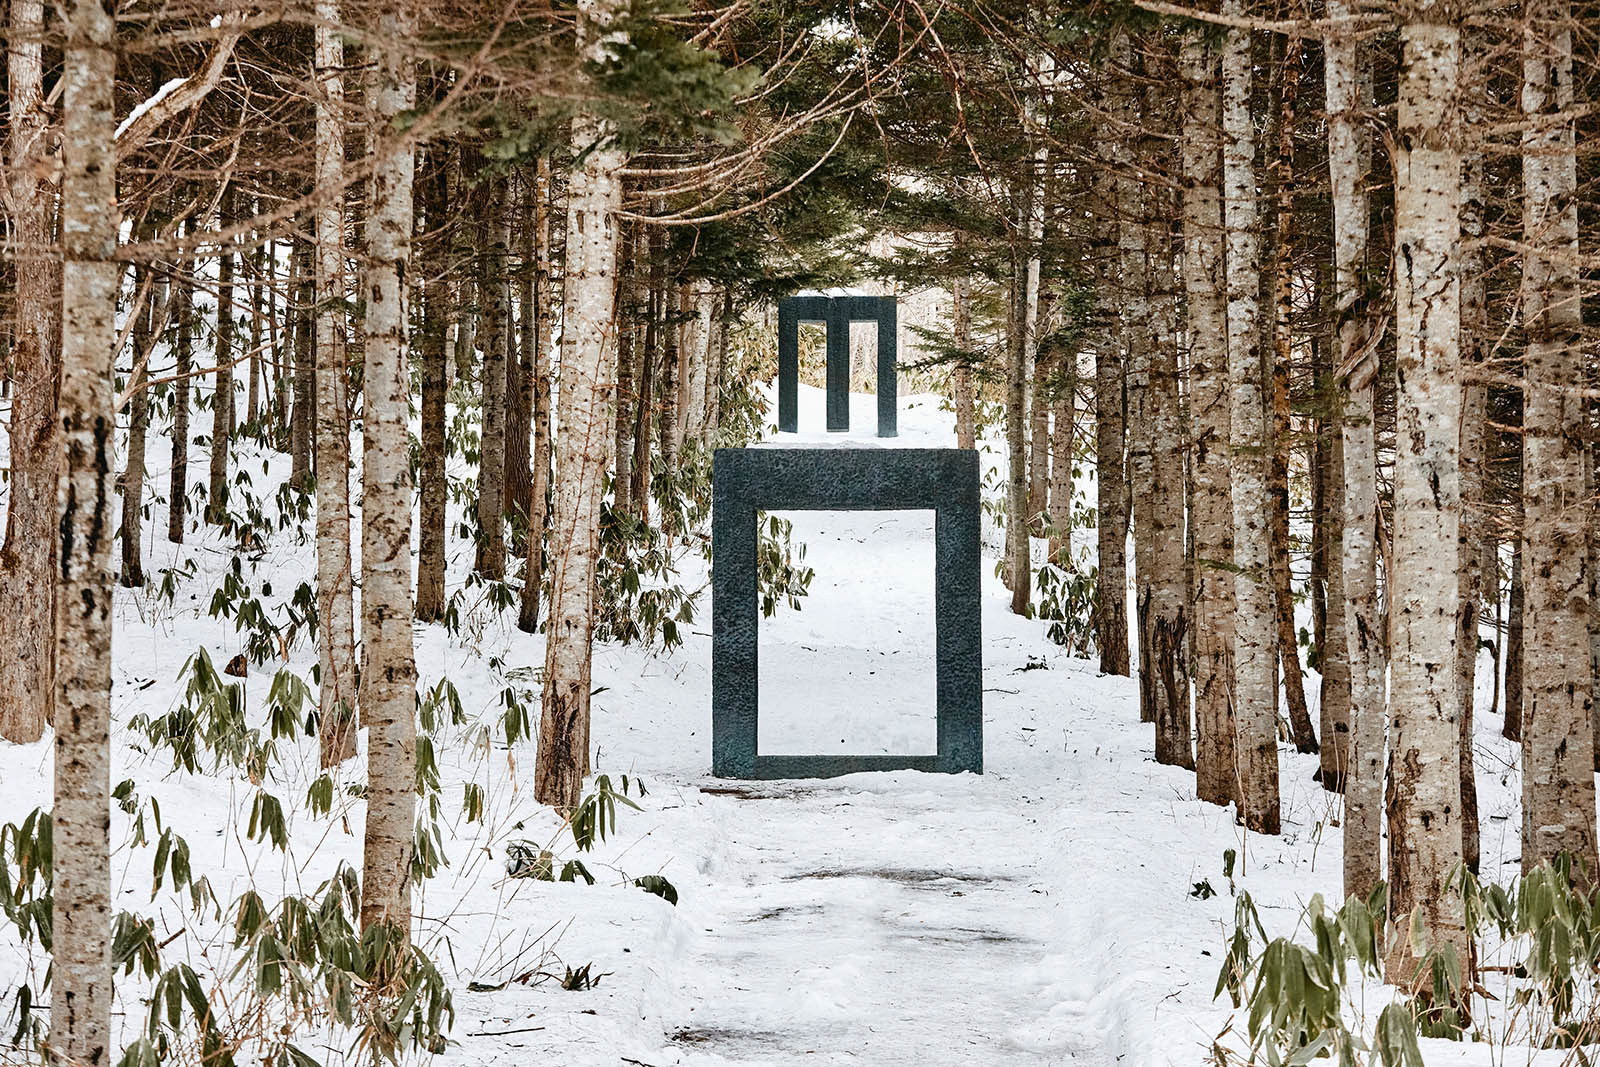 A photo of sculptures in a snowy forest